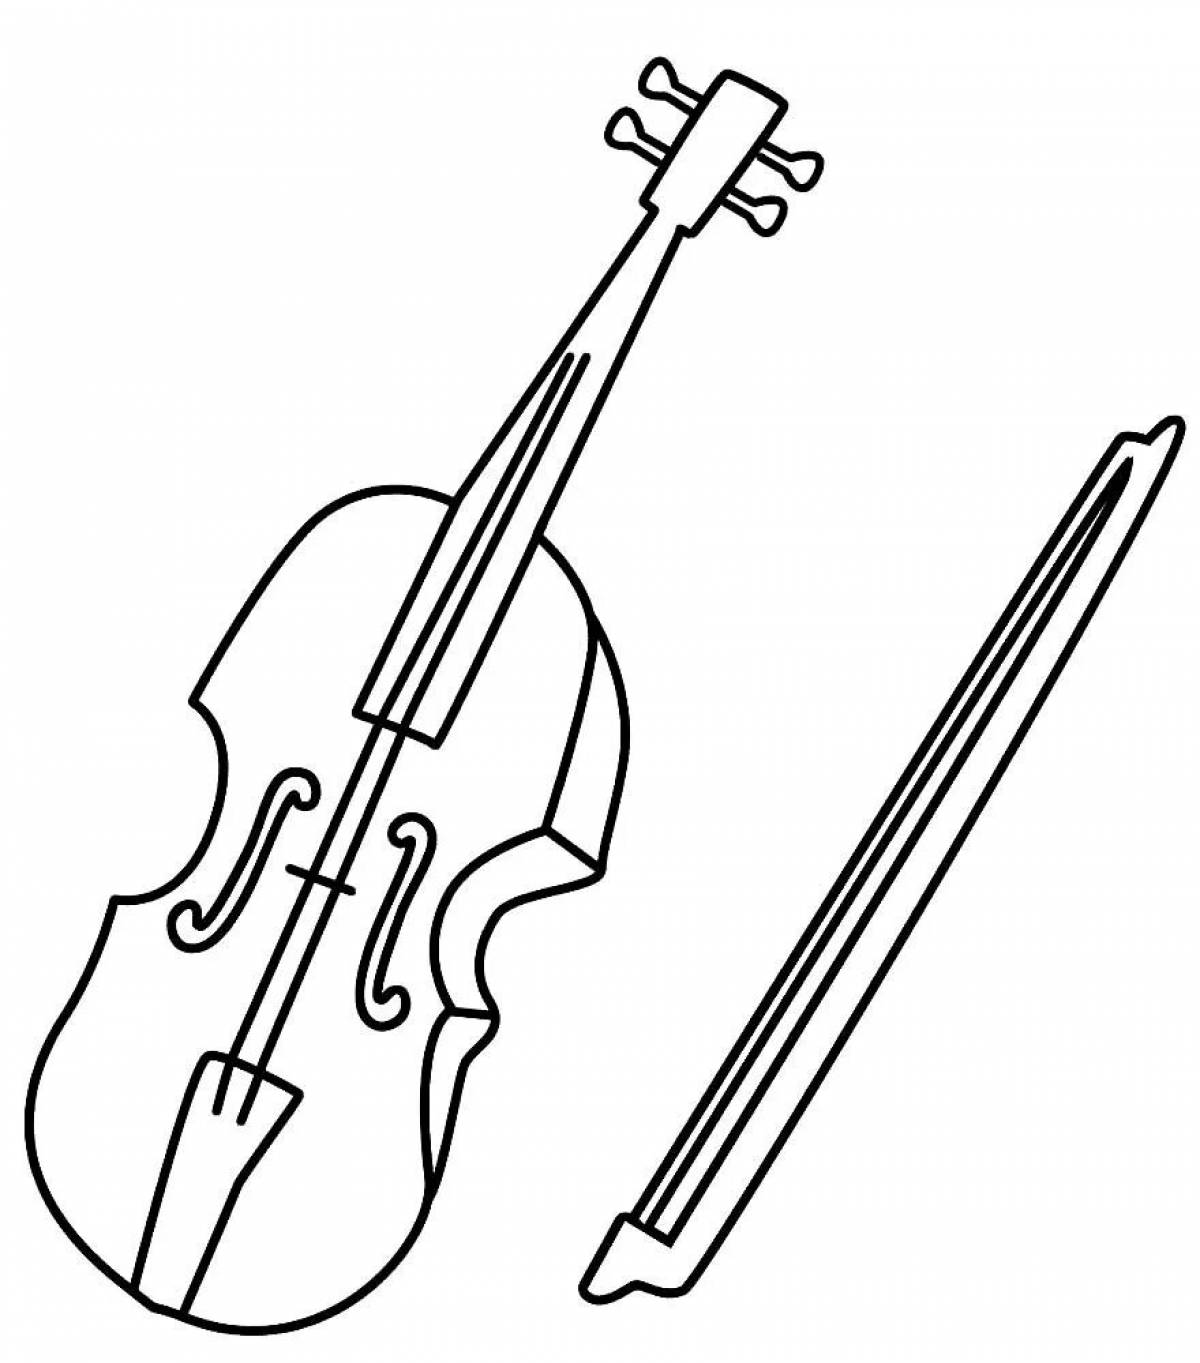 Dazzling violin coloring page for little ones